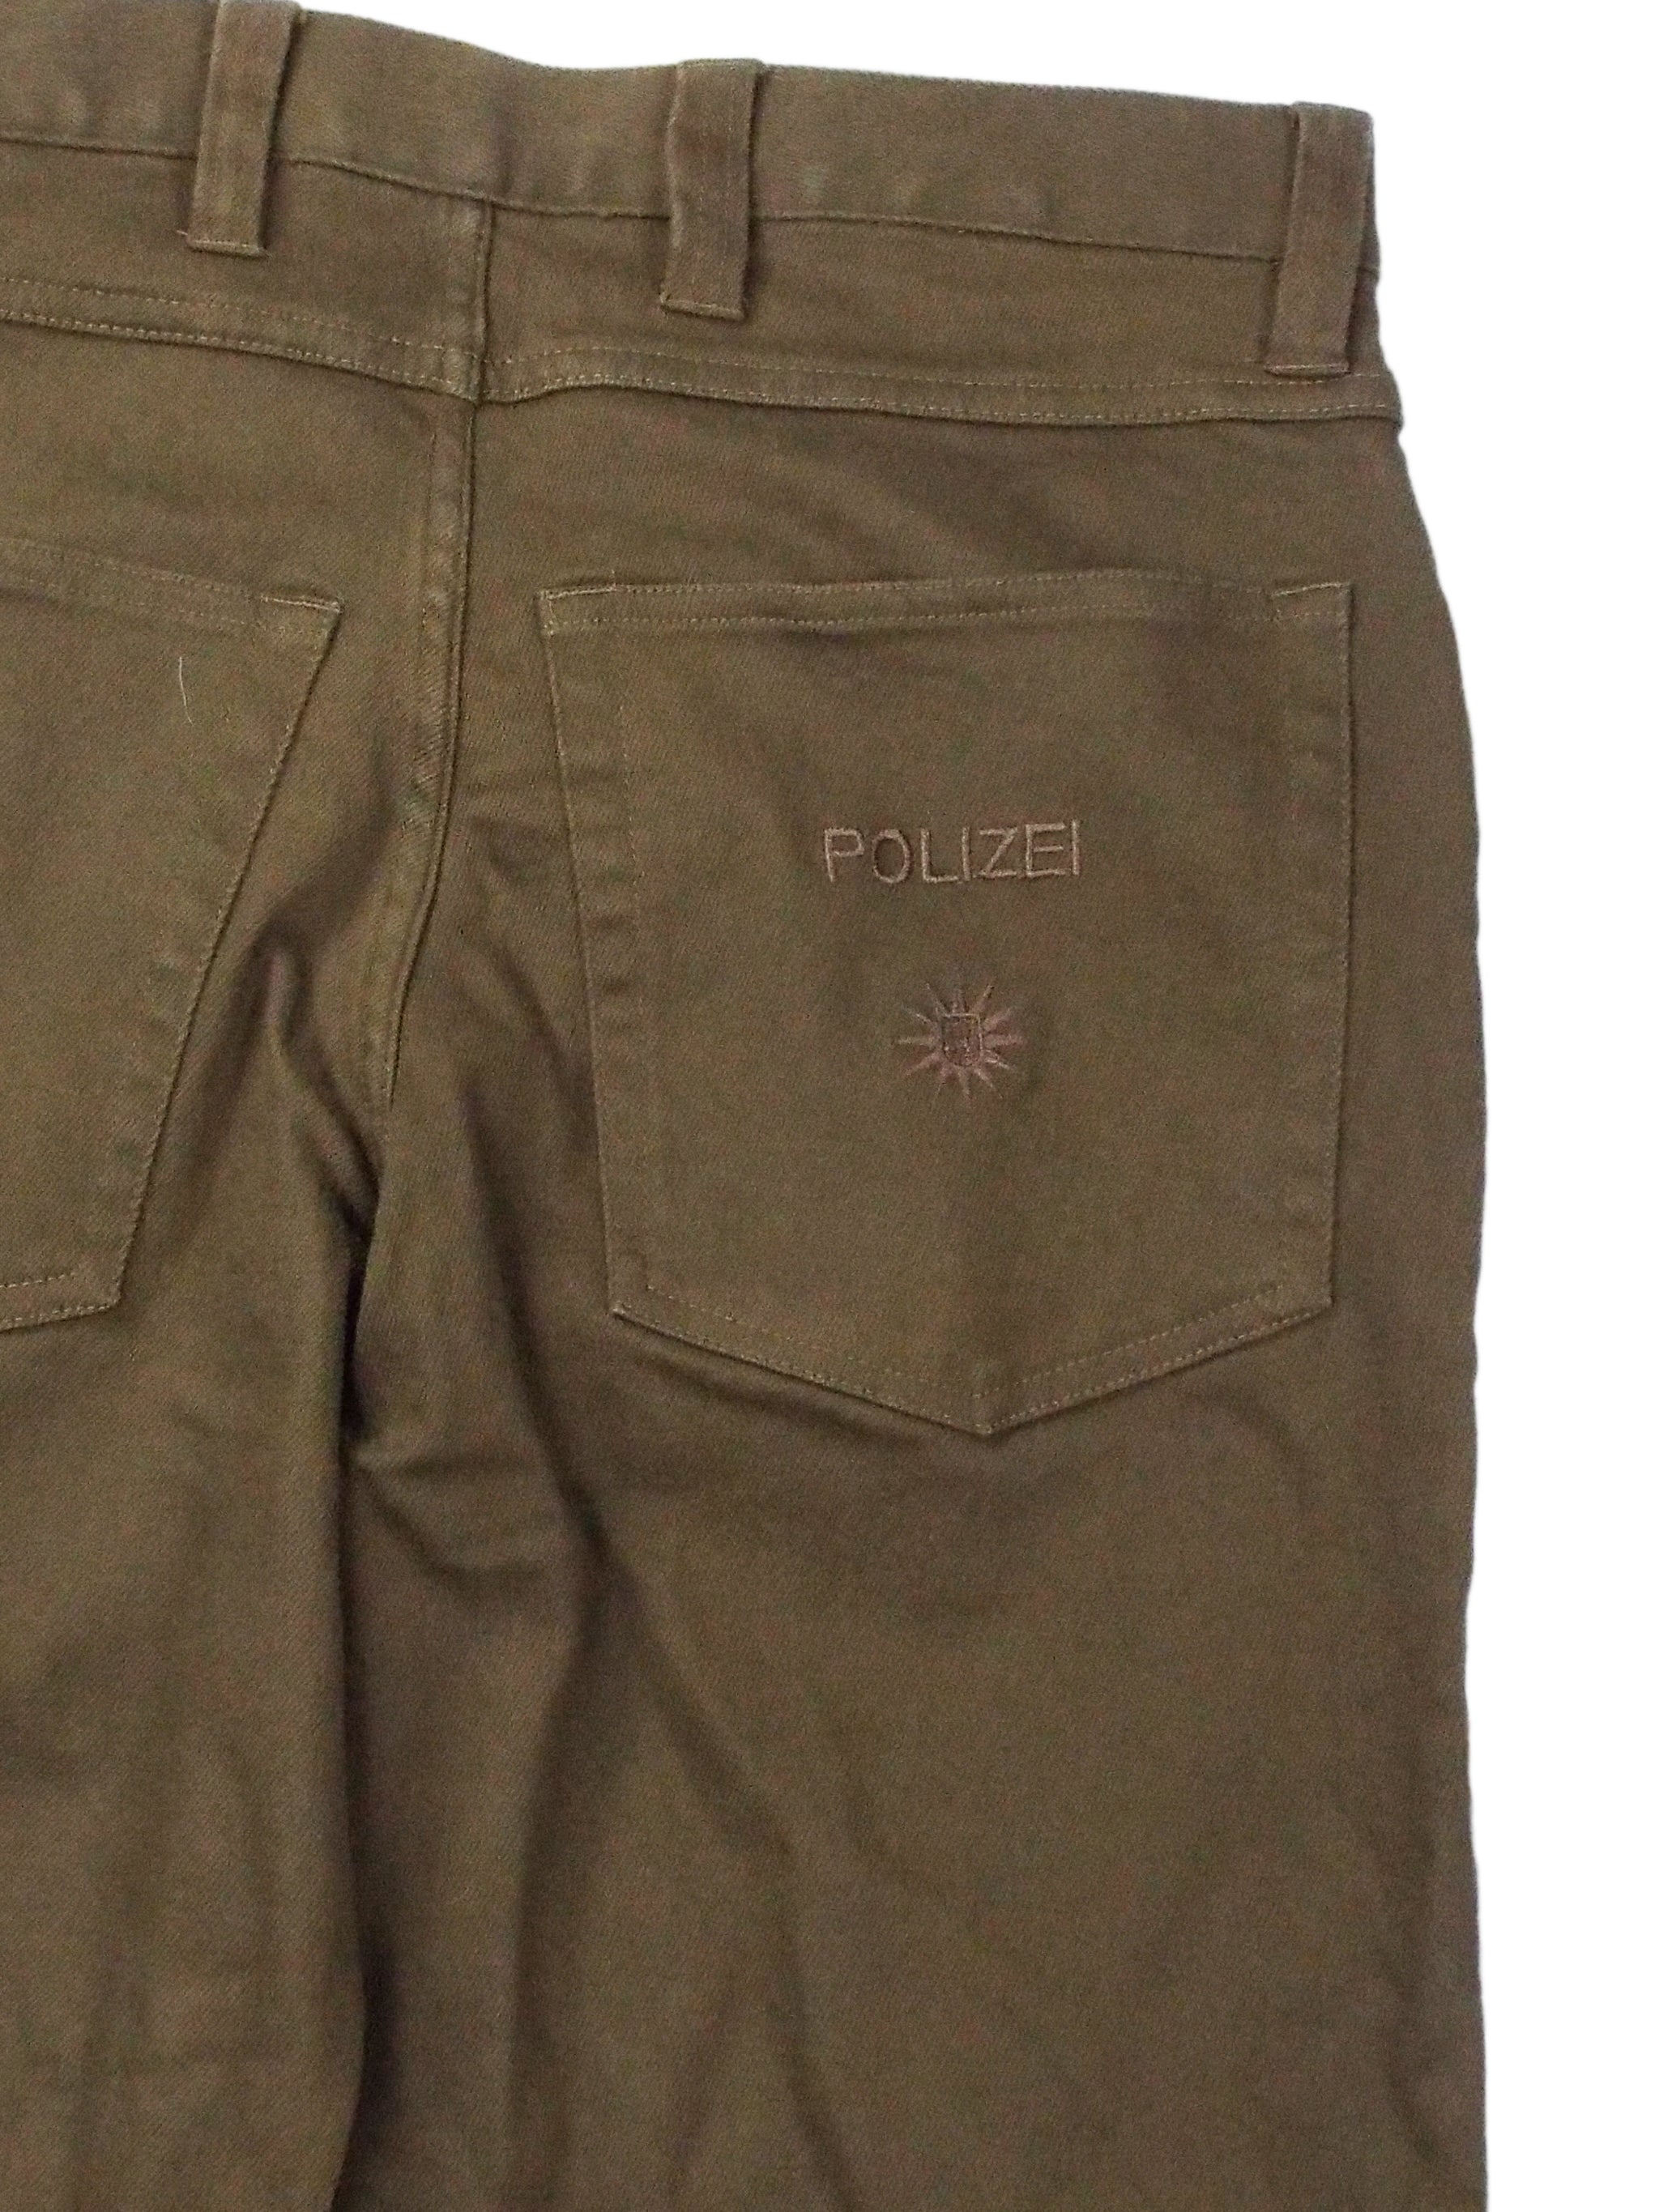 Dickies Tactical Pants are tough but very comfortable